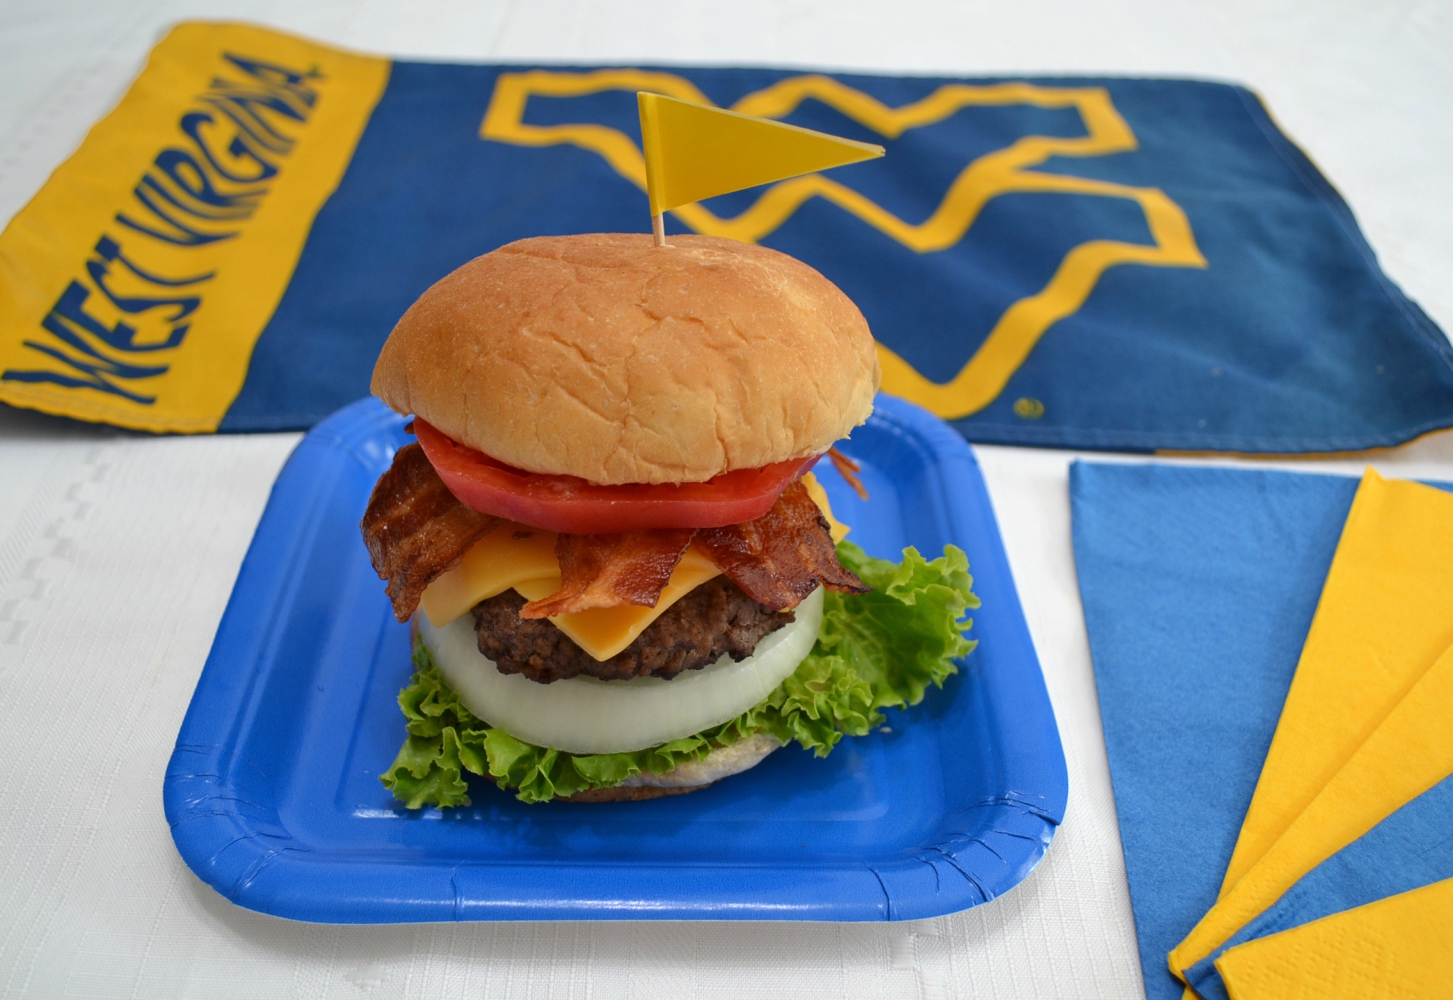 The WV Mountaineer Burger was created to honor the WVU football team and the state of WV. Perfect for tailgates. Loaded with beef, cheese and condiments.